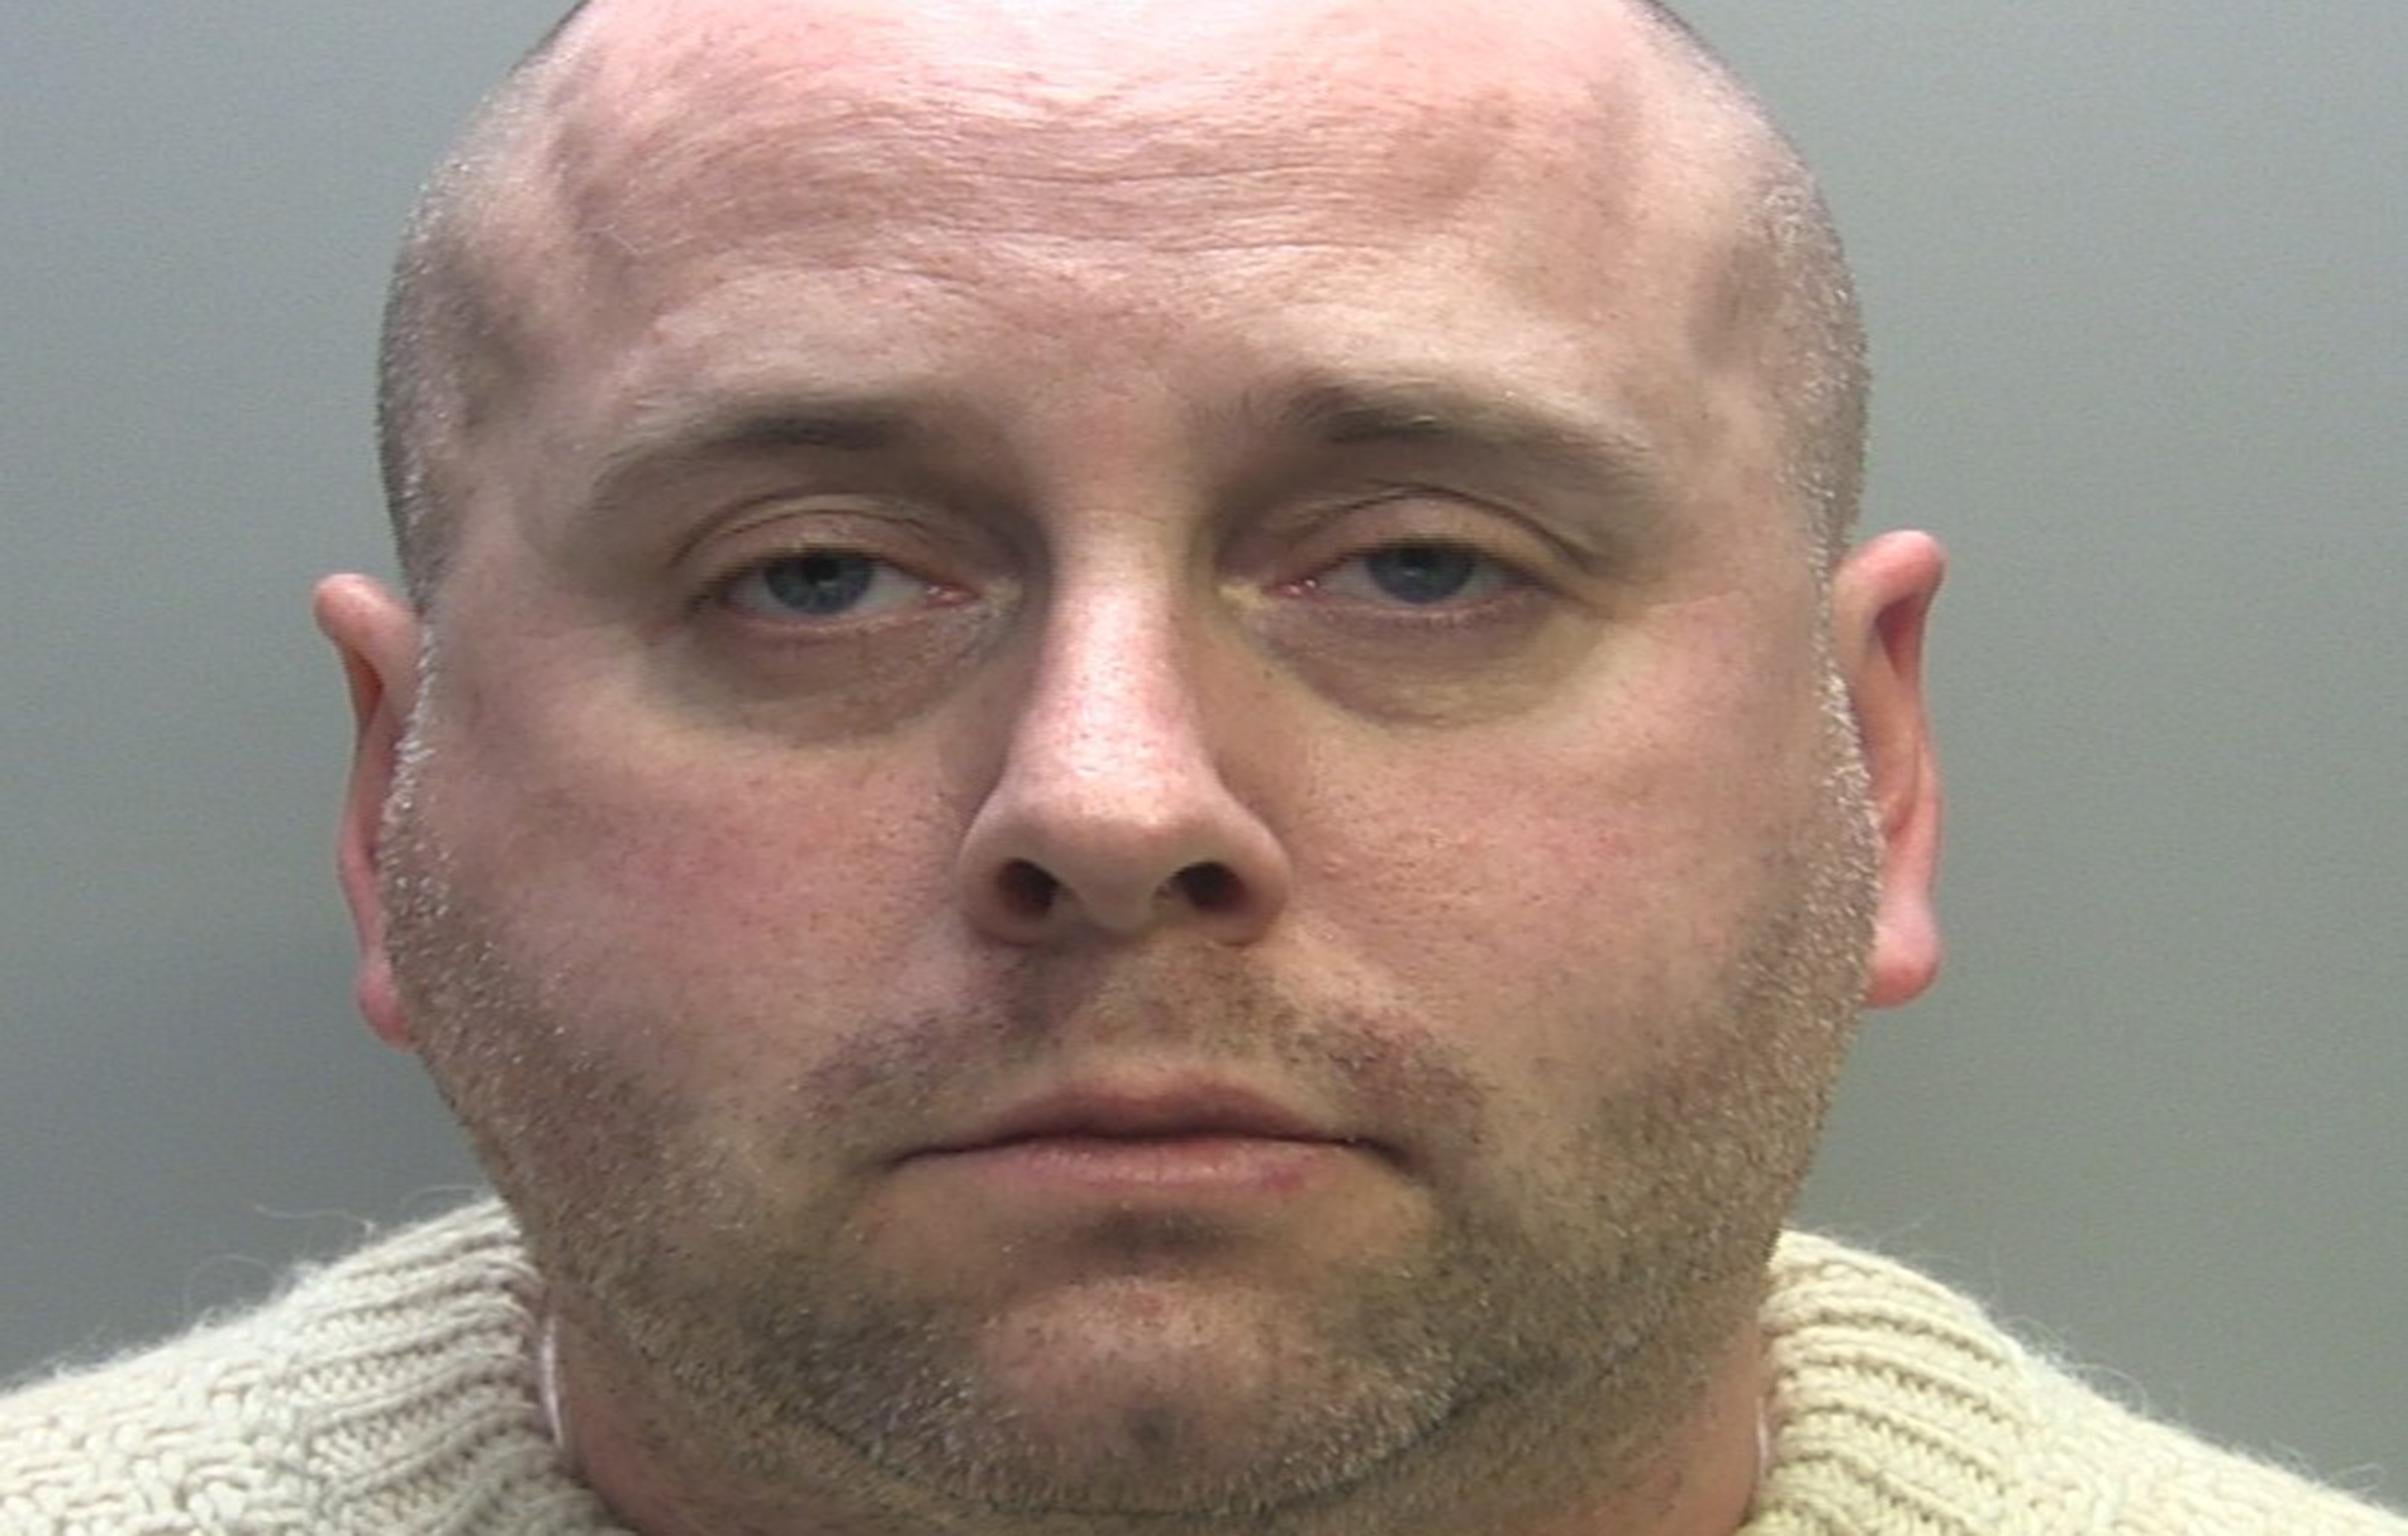 Suspected paedophile Stephen Carruthers was arrested after a car crash